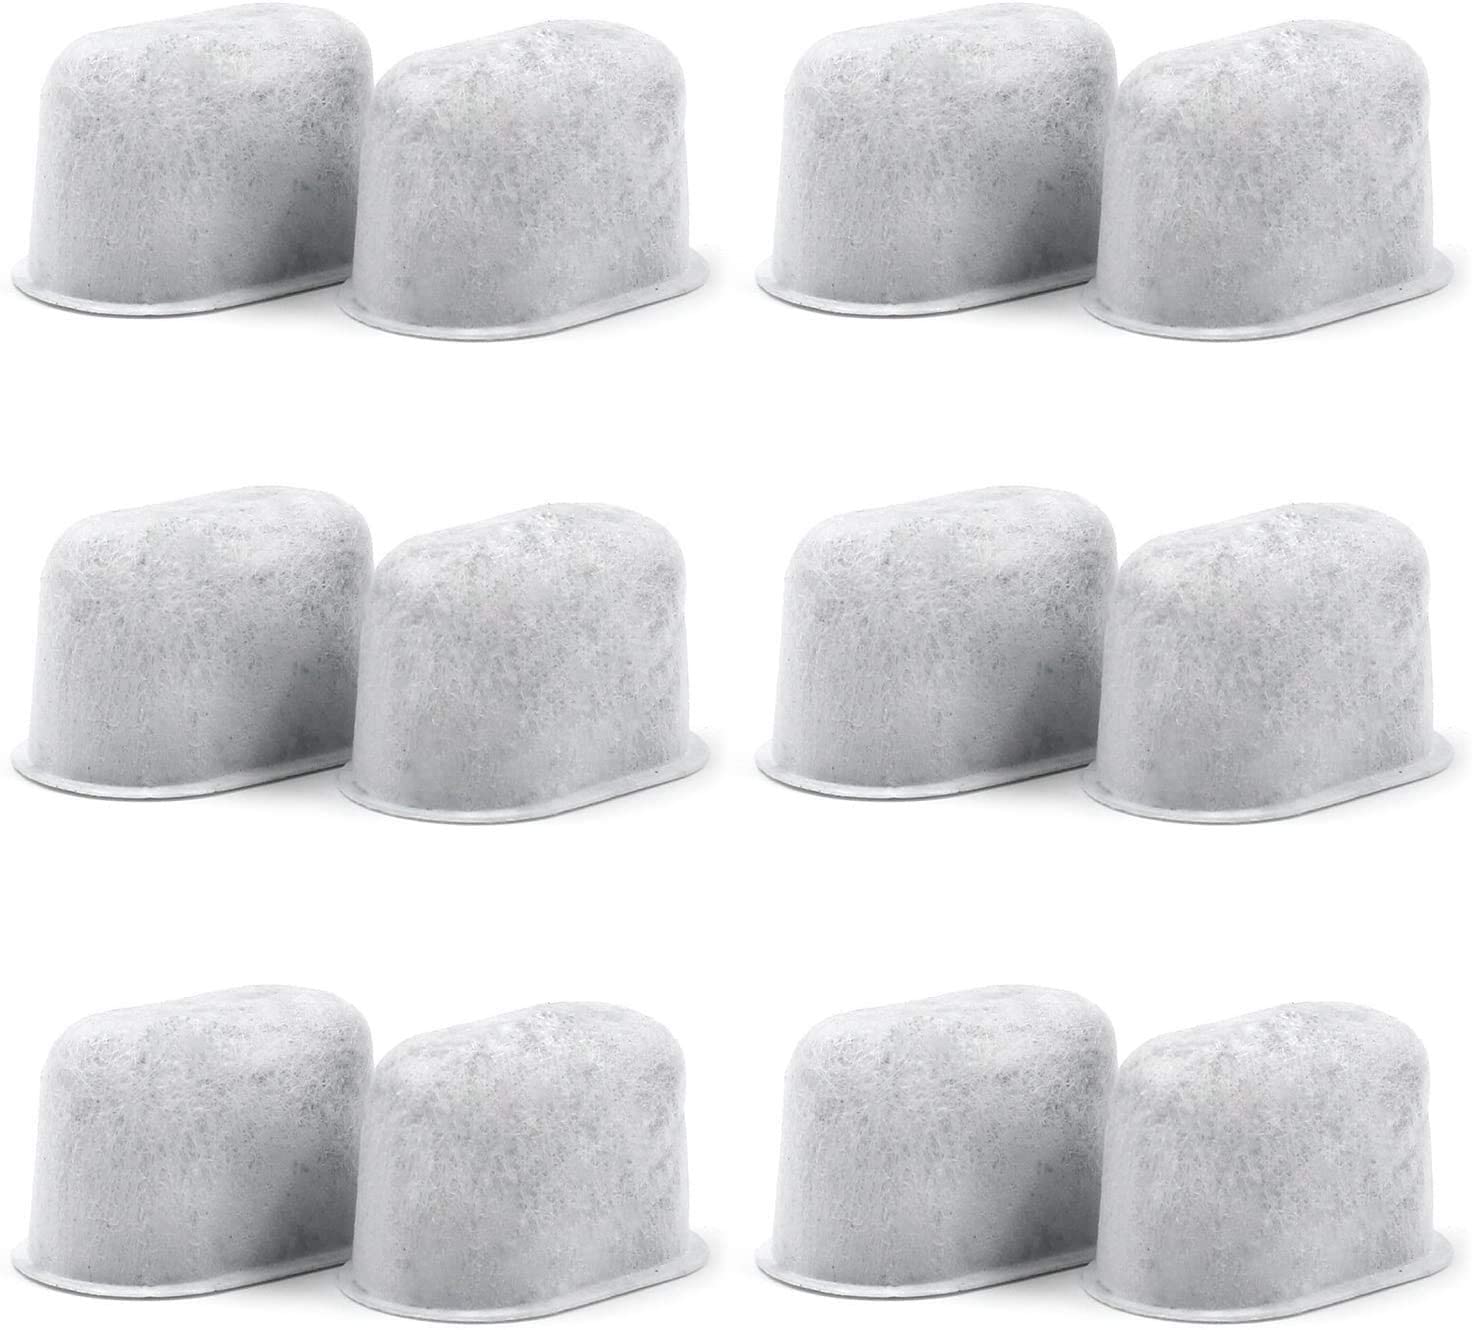 Possiave Cuisinart Compatible Coffee Maker Charcoal Filters, 12-Pack